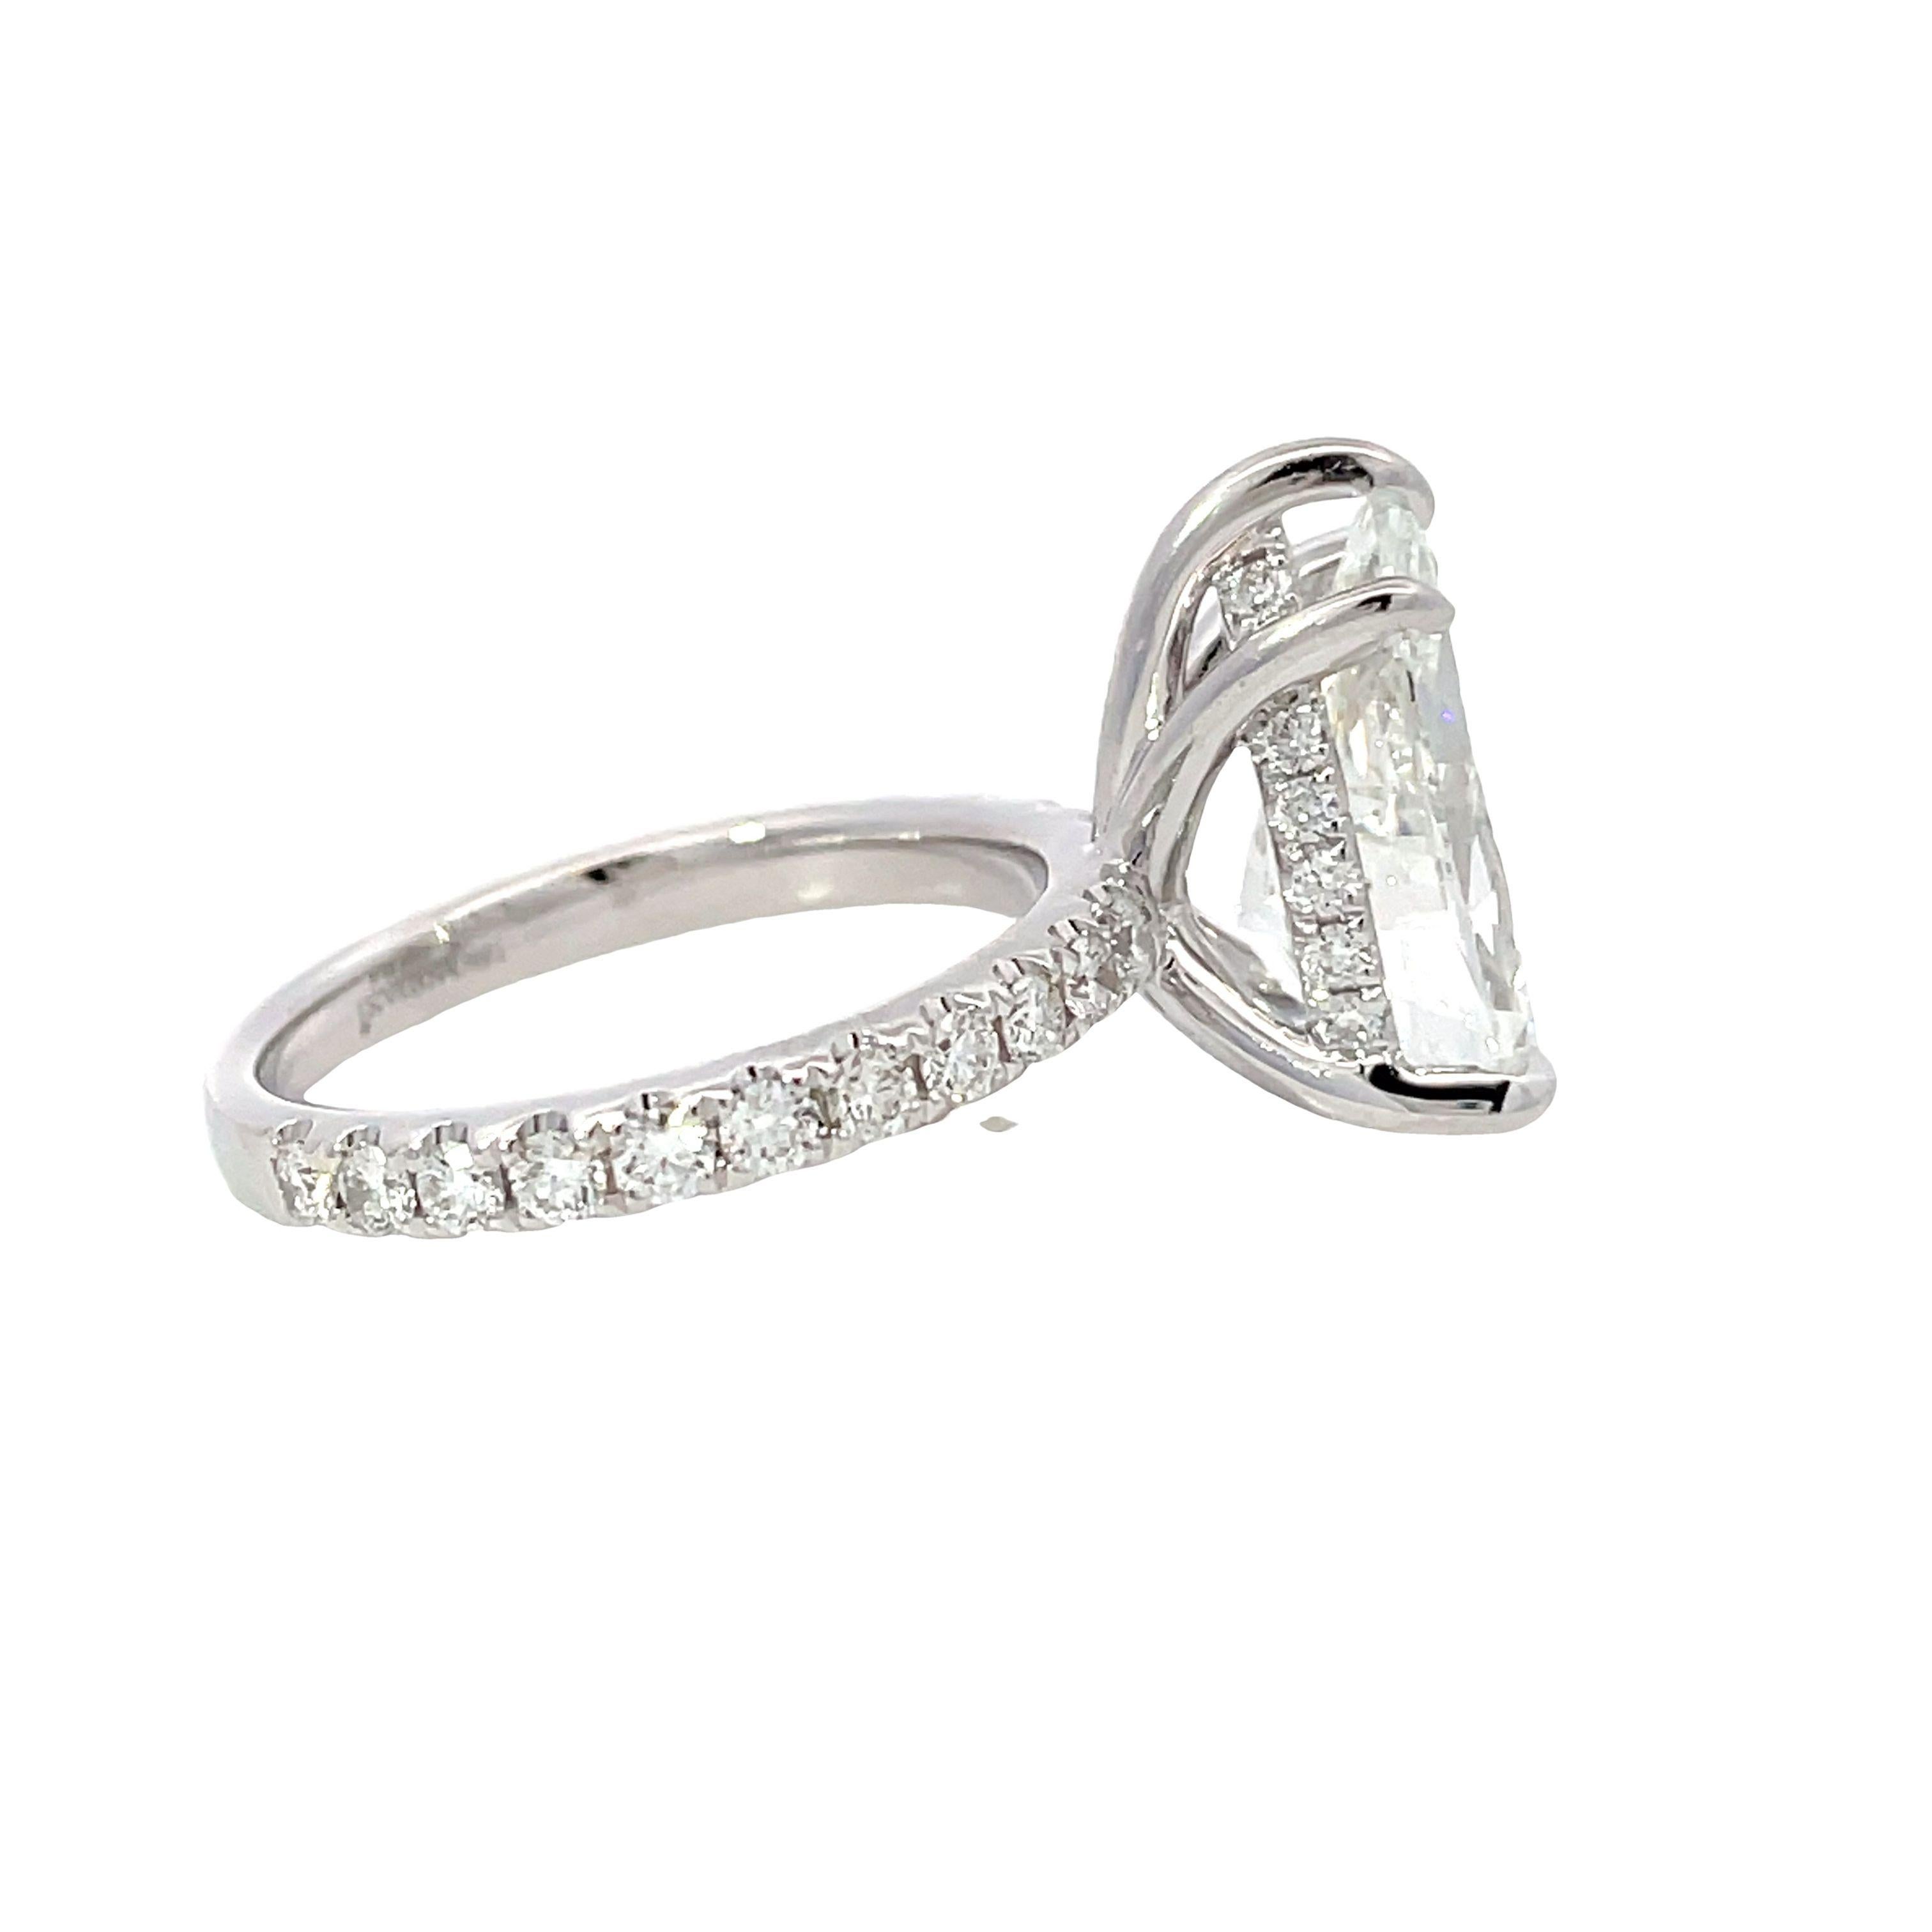 Embrace sophistication with our 18KW Ring showcasing a 5.03 CTW pear-shaped white diamond (H, VS1) accented by 0.86 CTW of round white diamonds, certified by GIA (Cert. No. 7235044592).